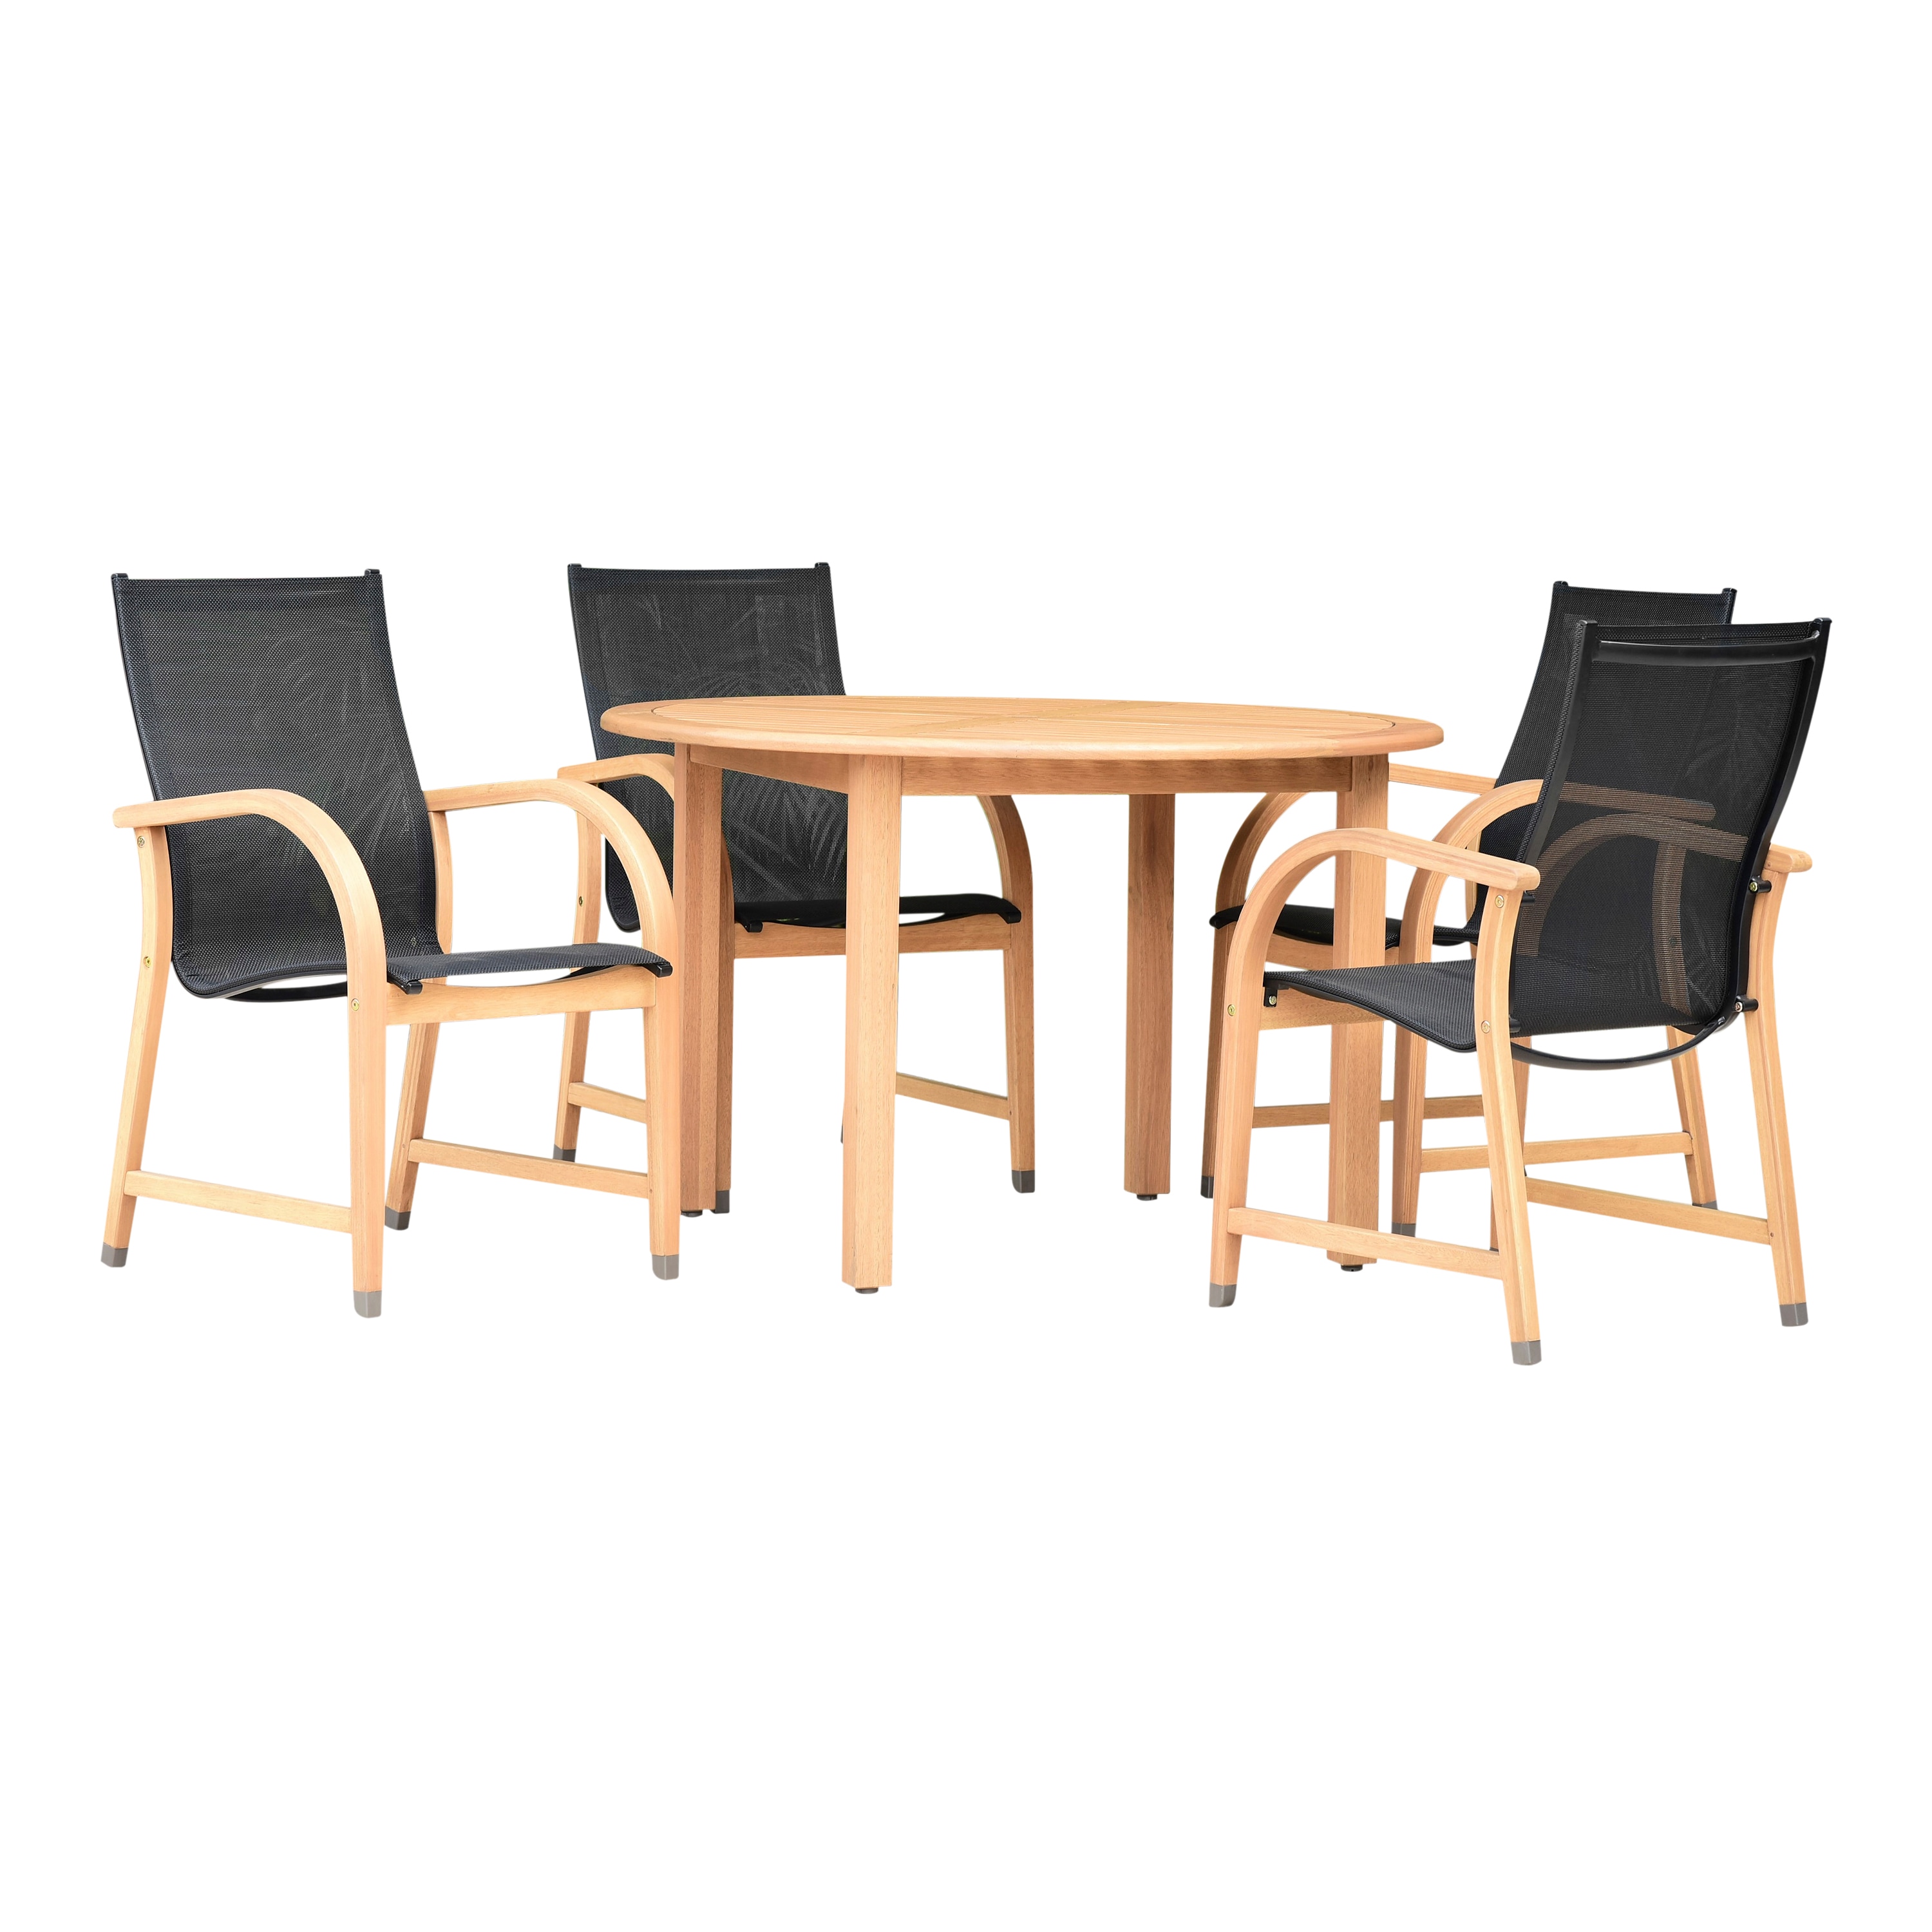 Get Grande 7-piece Eucalyptus Wood Outdoor Patio Furniture Dining Set in MI  at English Gardens Nurseries  Serving Clinton Township, Dearborn Heights,  Eastpointe, Royal Oak, West Bloomfield, and the Plymouth - Ann